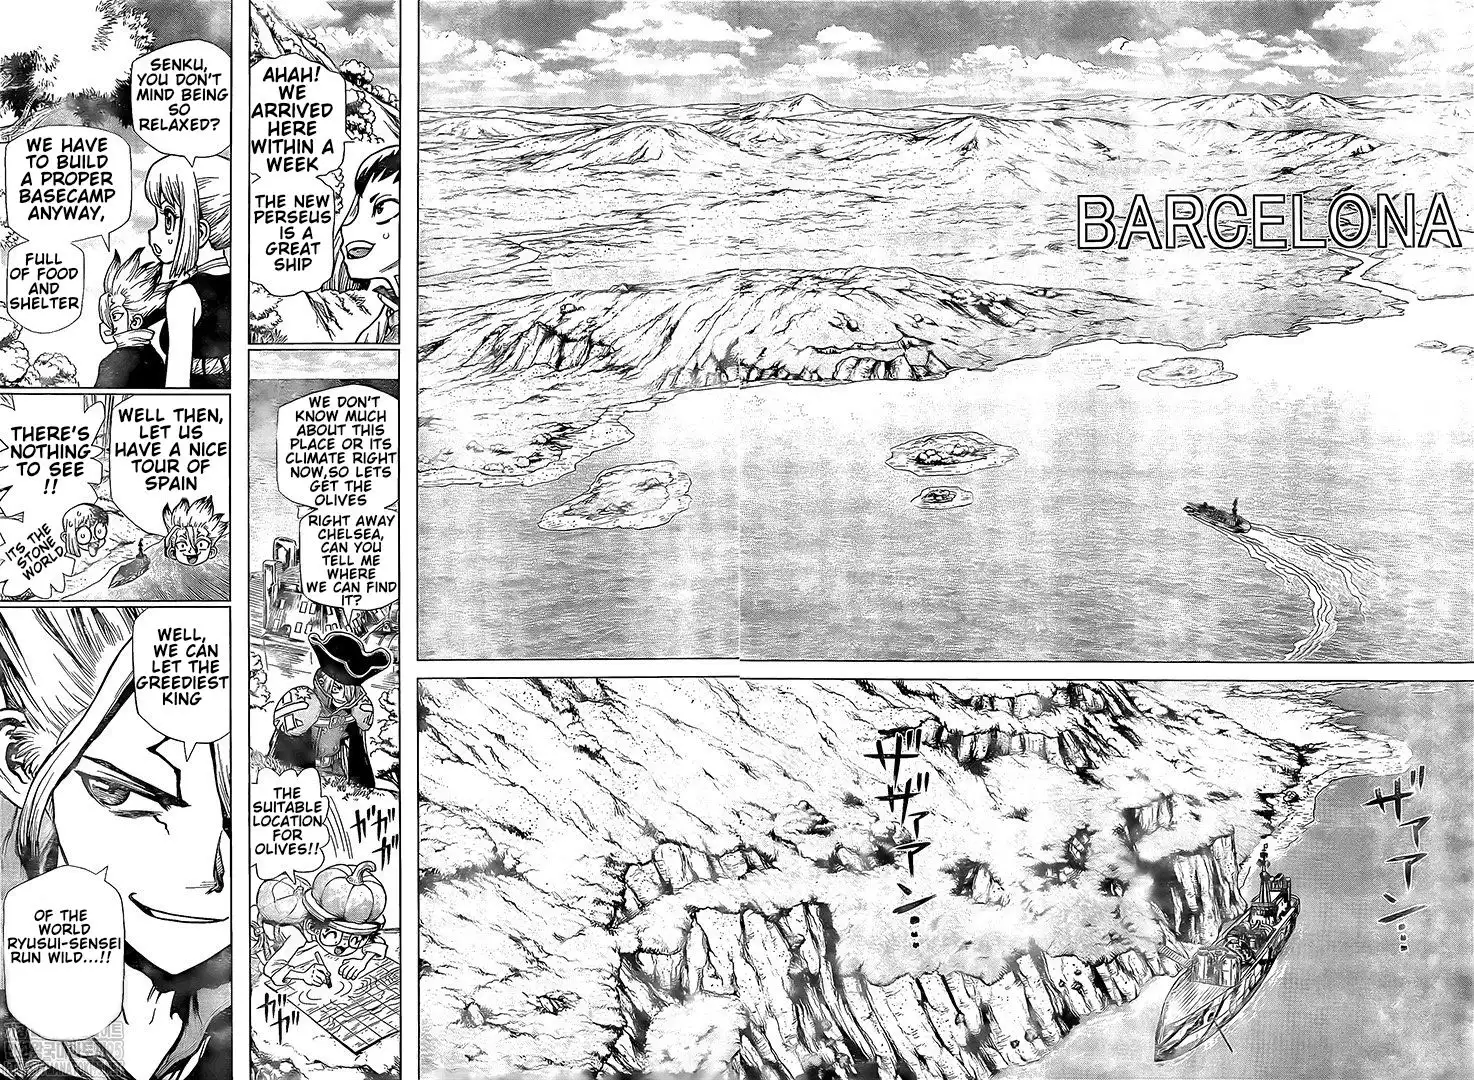 Dr. Stone Chapter 202